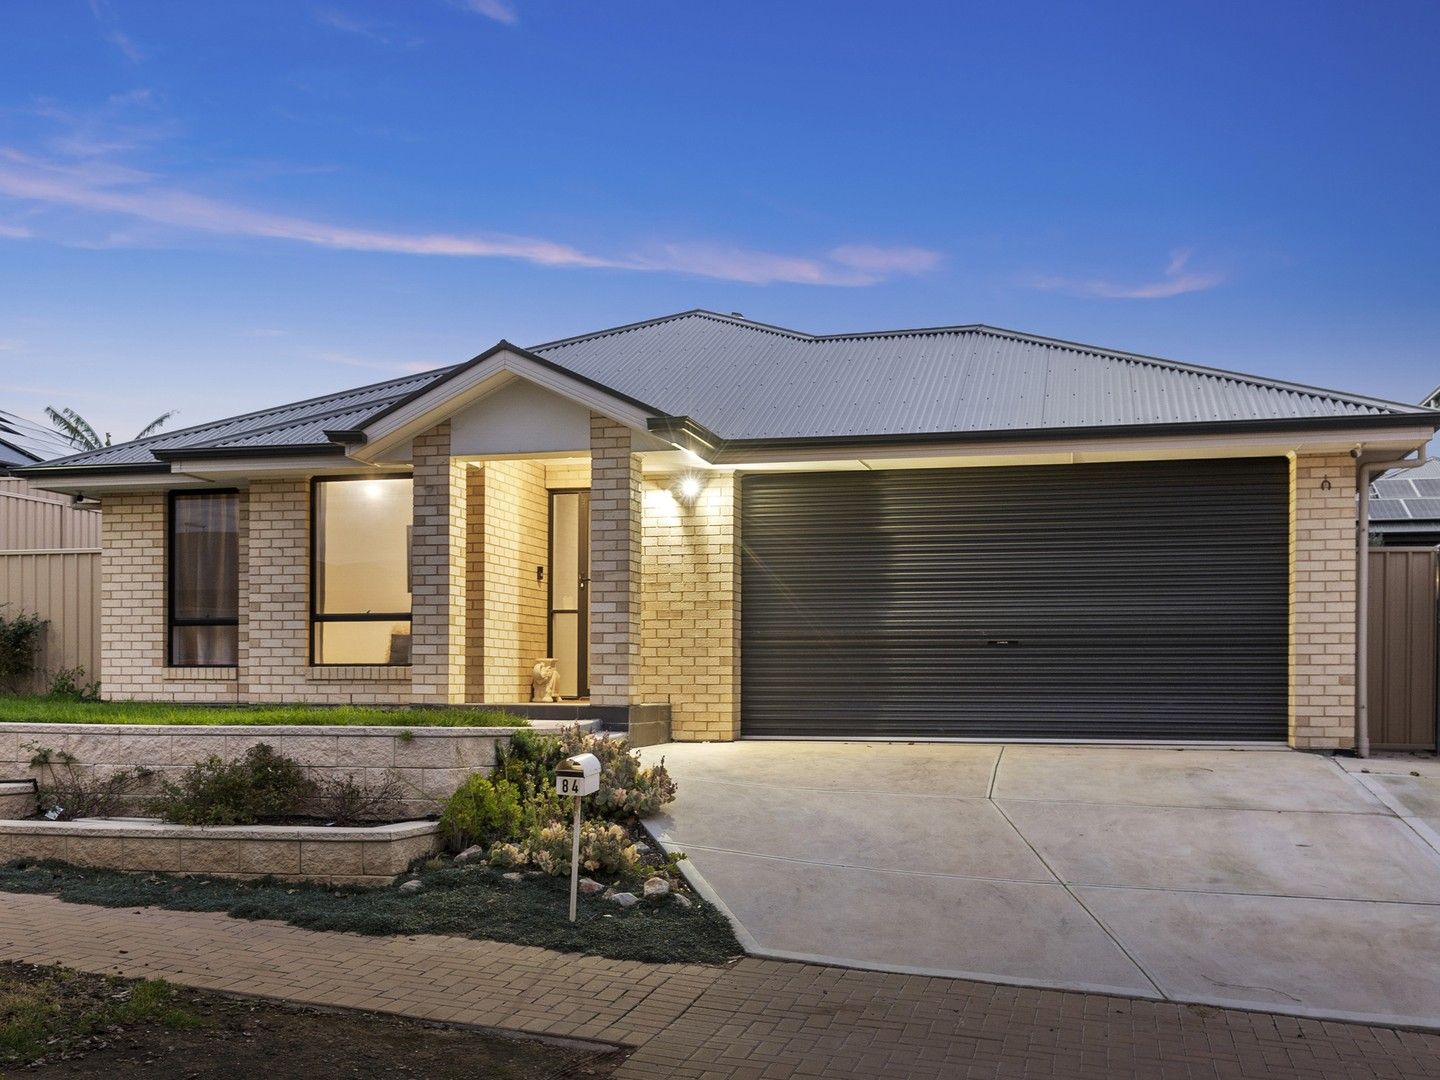 4 bedrooms House in 84 Mast Avenue SEAFORD MEADOWS SA, 5169